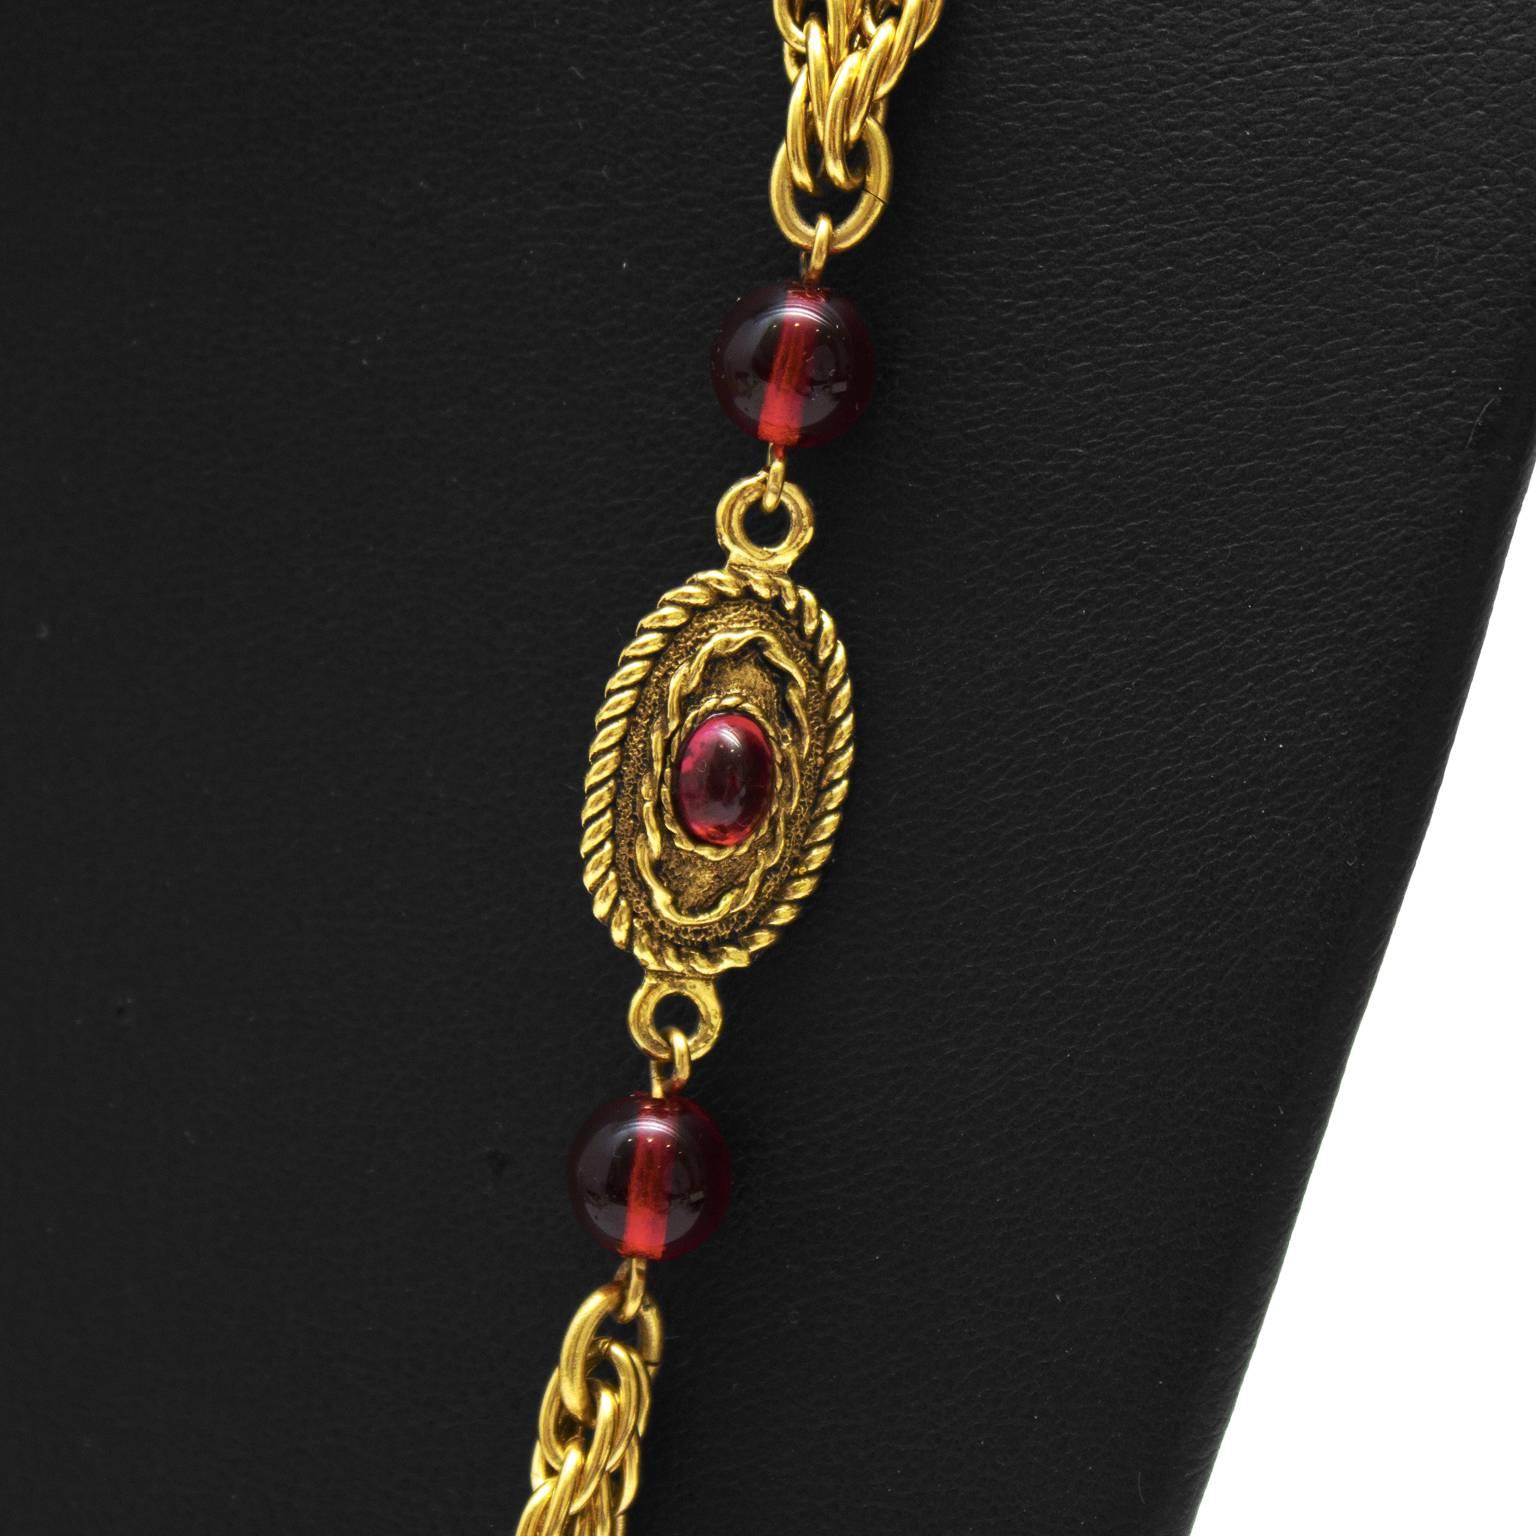 Early edition Chanel double rope chain long necklace with red glass bead detail from 1982. The double rope chains connect red poured glass beads and oval shaped charms with matching poured glass at the center surrounded with a twisted rope detail.